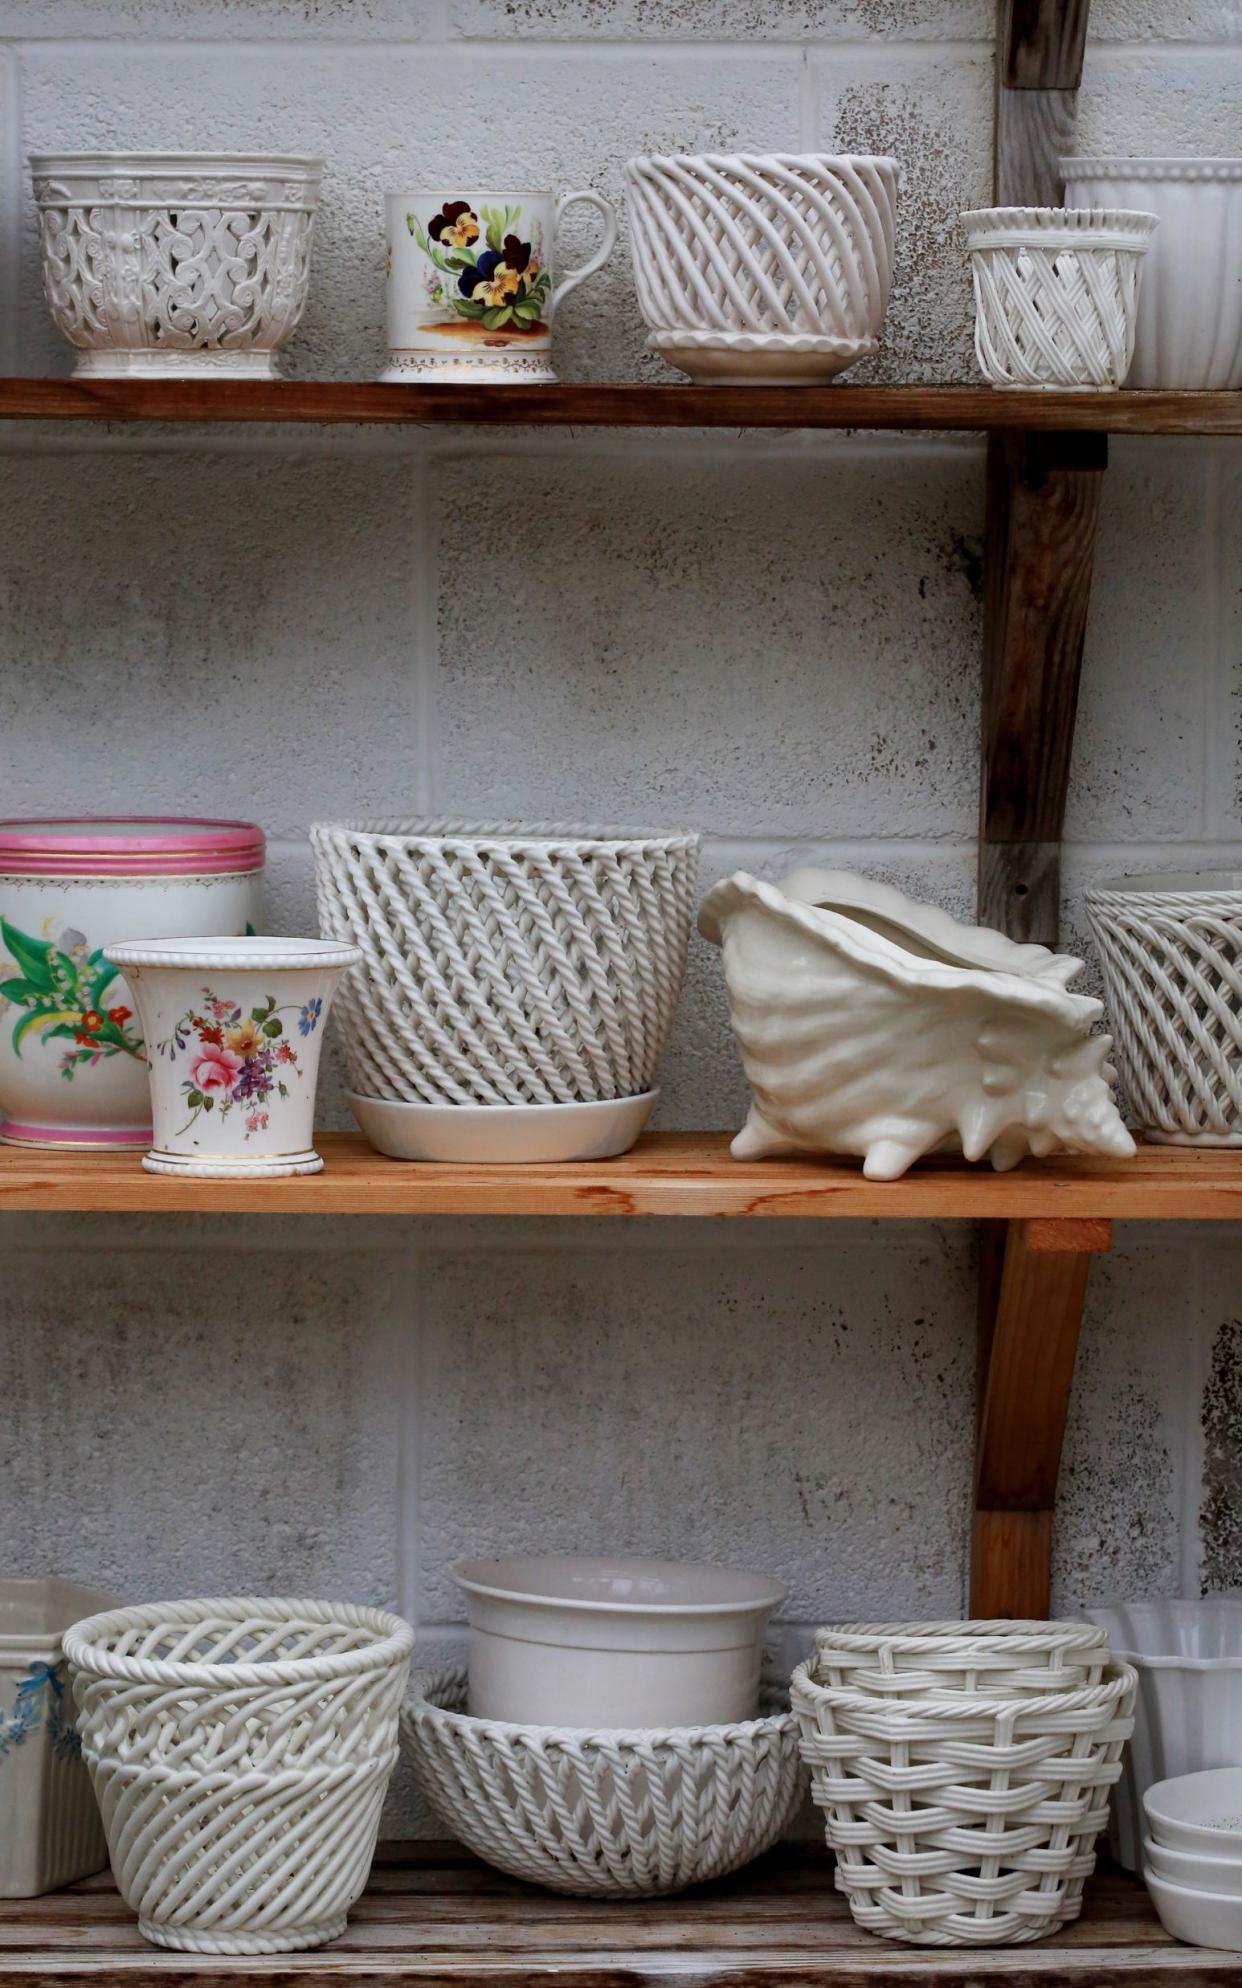 A range of ceramic pots in the potting shed of Cath Kidston's garden in Gloucestershire